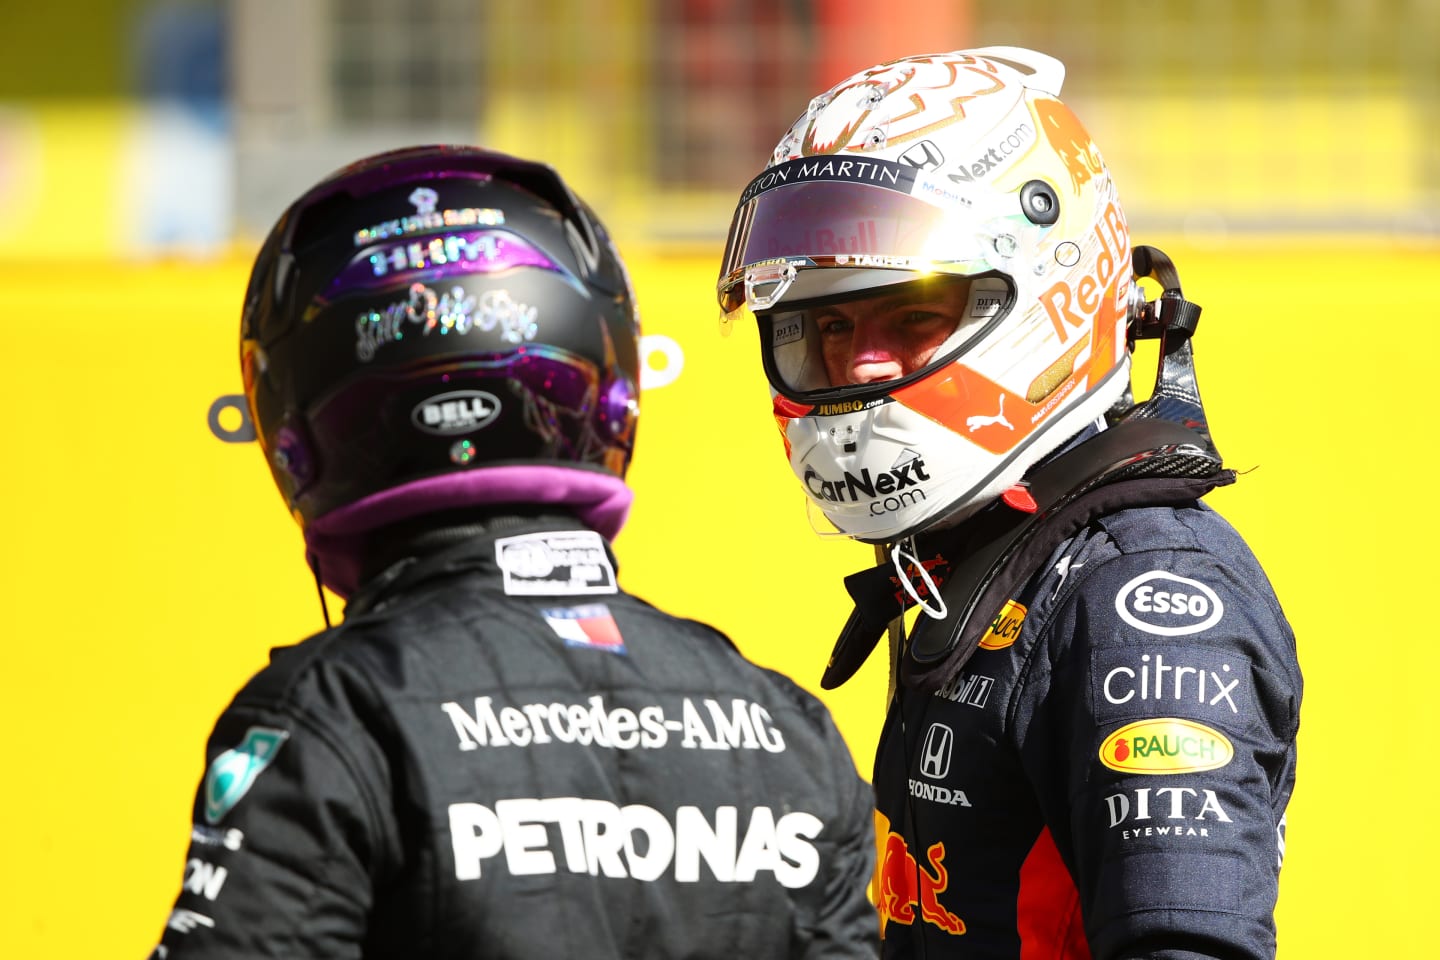 SCARPERIA, ITALY - SEPTEMBER 12: Pole position qualifier Lewis Hamilton of Great Britain and Mercedes GP and third placed qualifier Max Verstappen of Netherlands and Red Bull Racing talk in parc ferme during qualifying for the F1 Grand Prix of Tuscany at Mugello Circuit on September 12, 2020 in Scarperia, Italy. (Photo by Bryn Lennon/Getty Images)